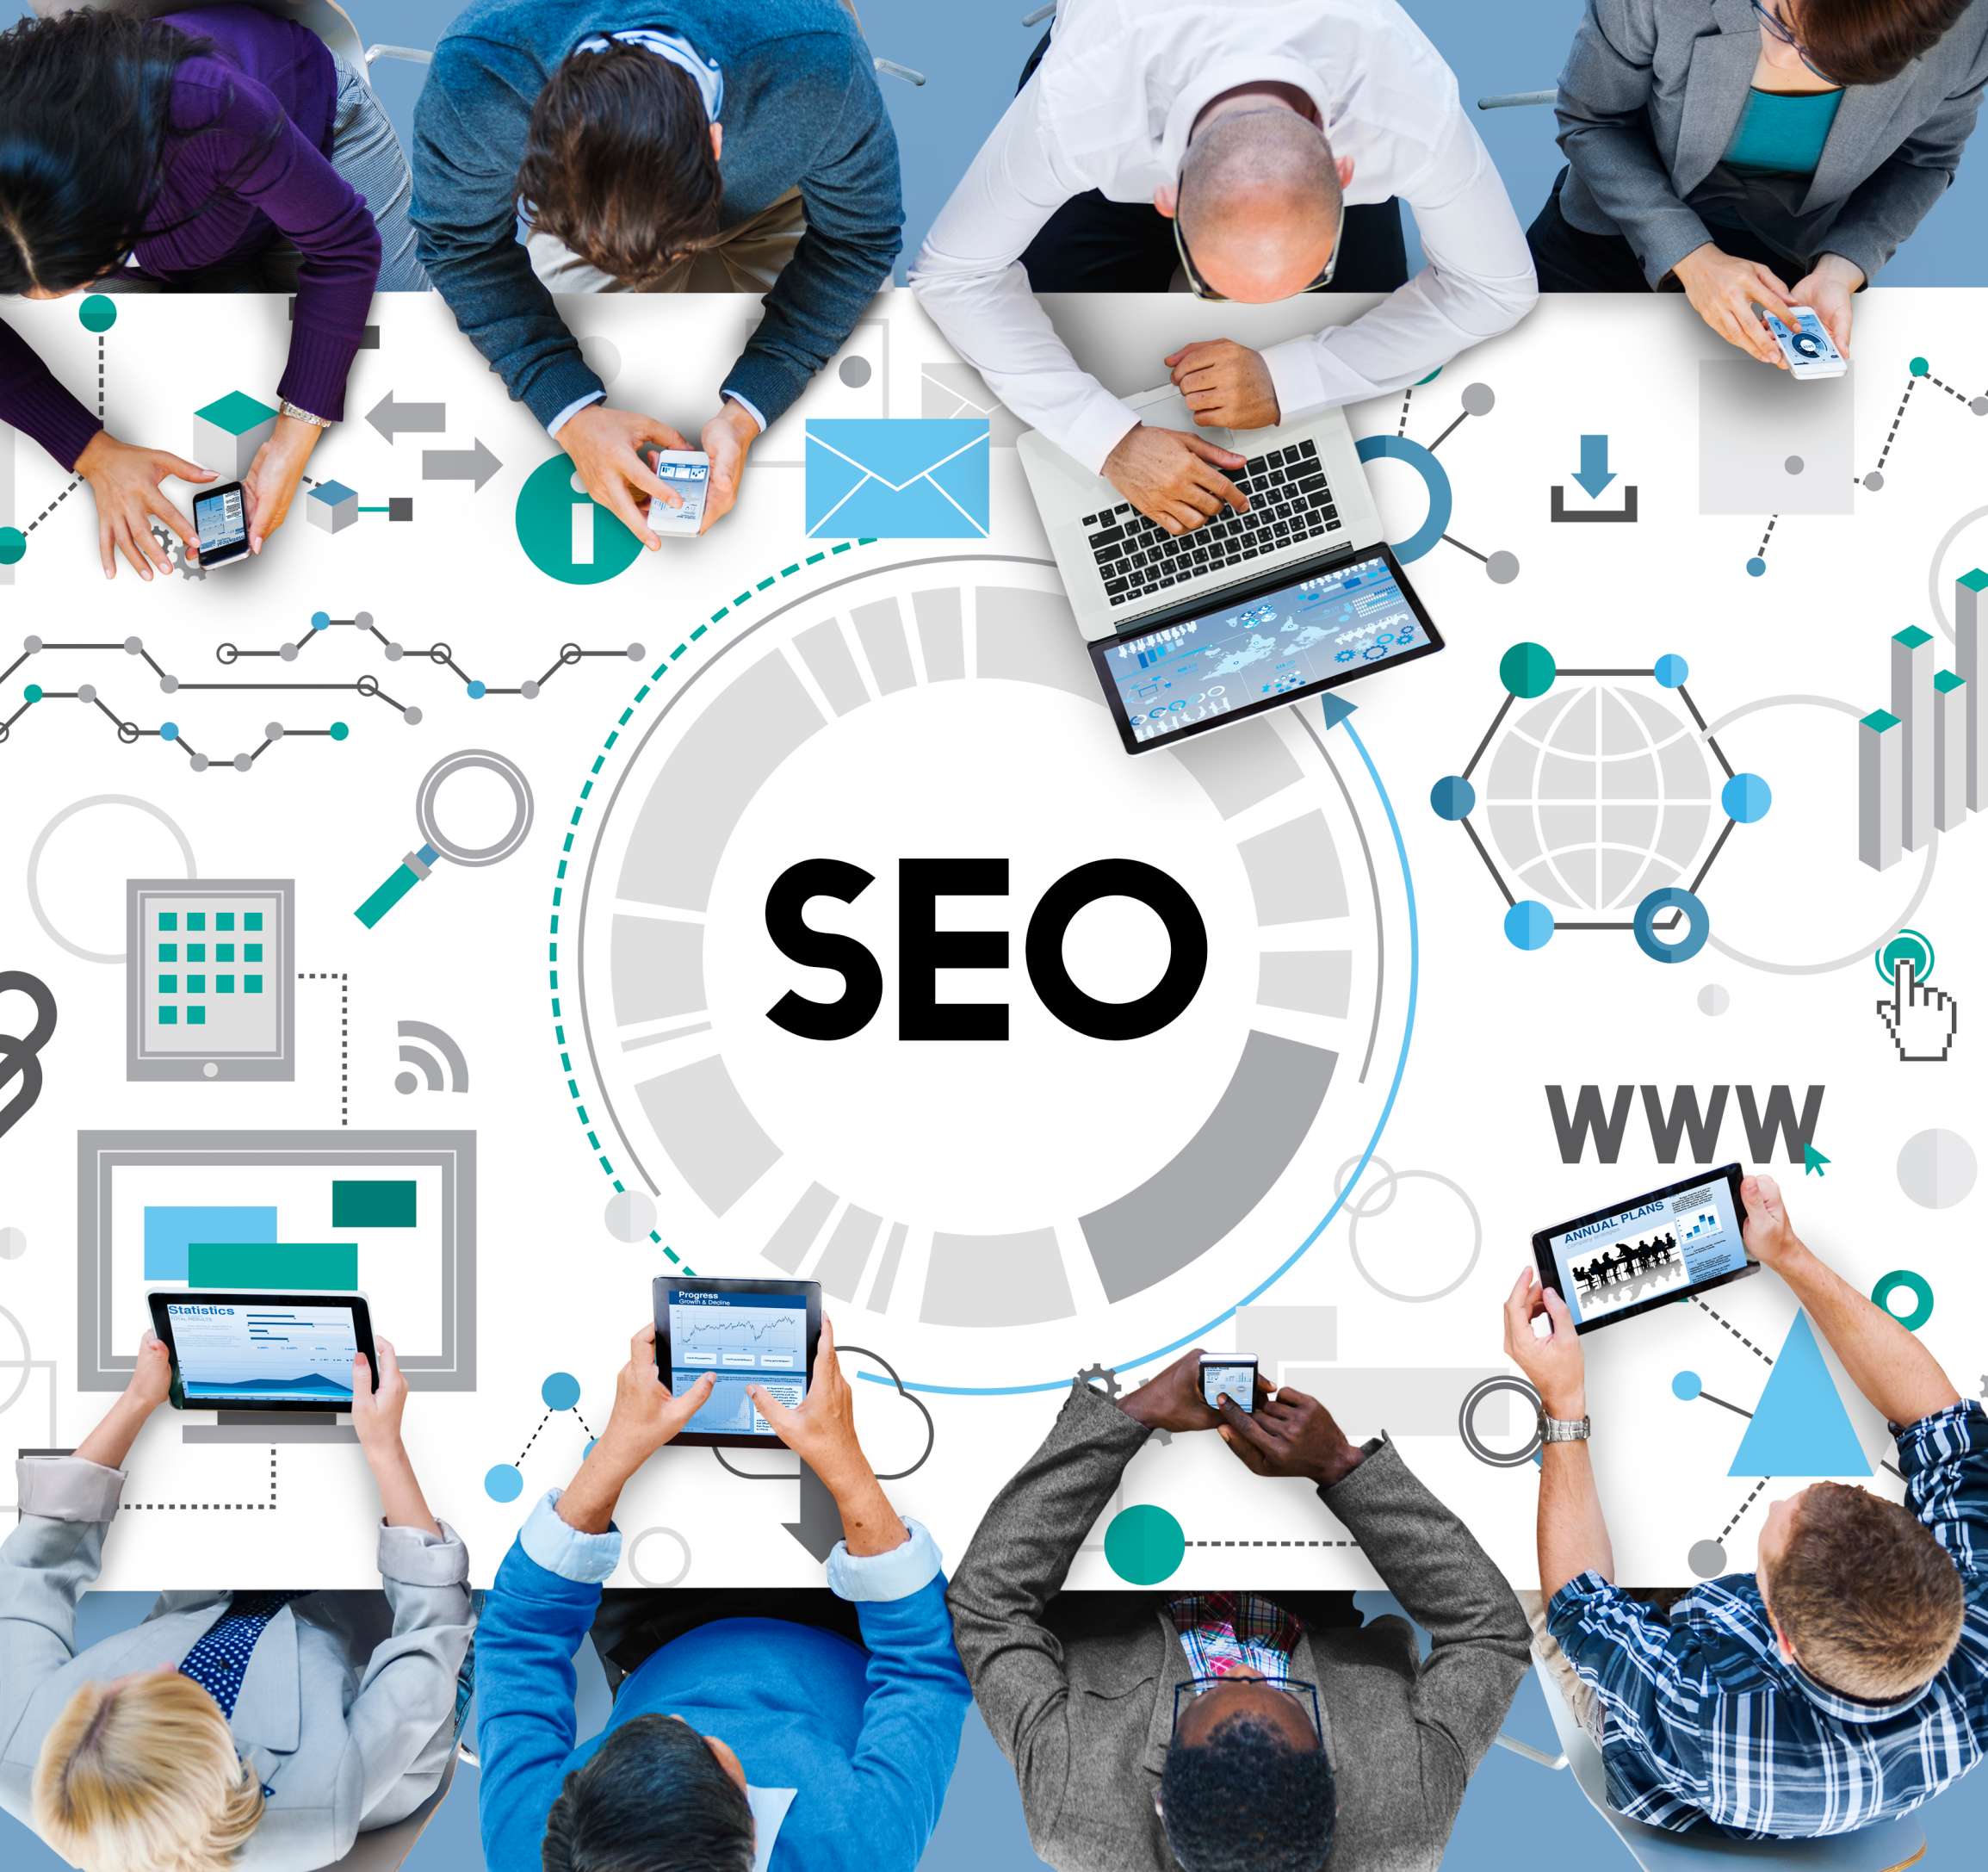 benefits of search engine marketing